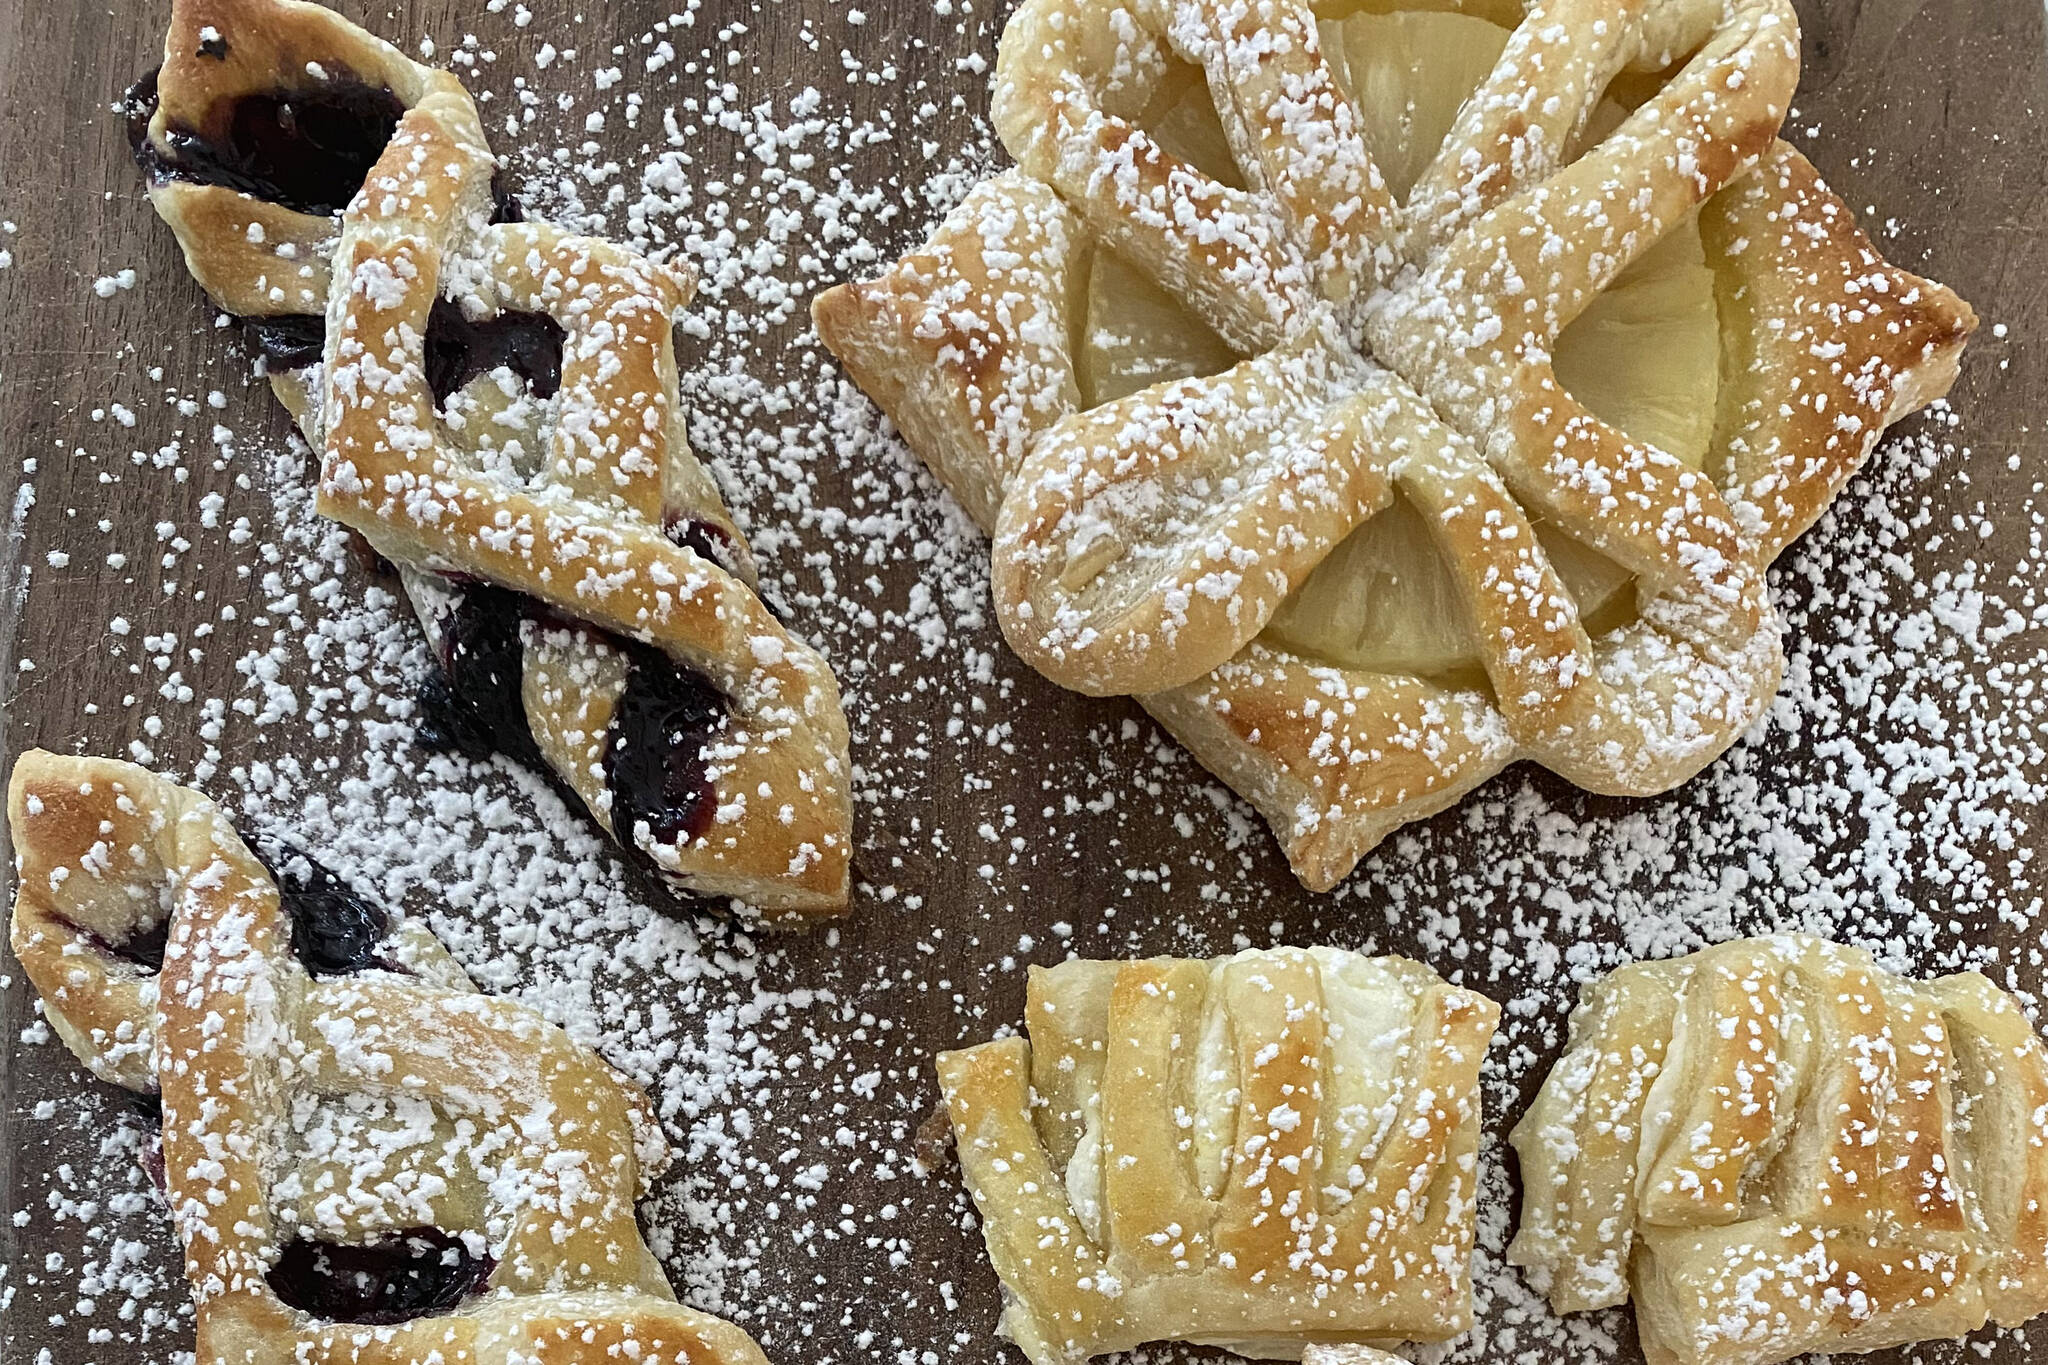 Puff pastry desserts are sprinkled with sugar. (Photo by Tressa Dale/Peninsula Clarion)